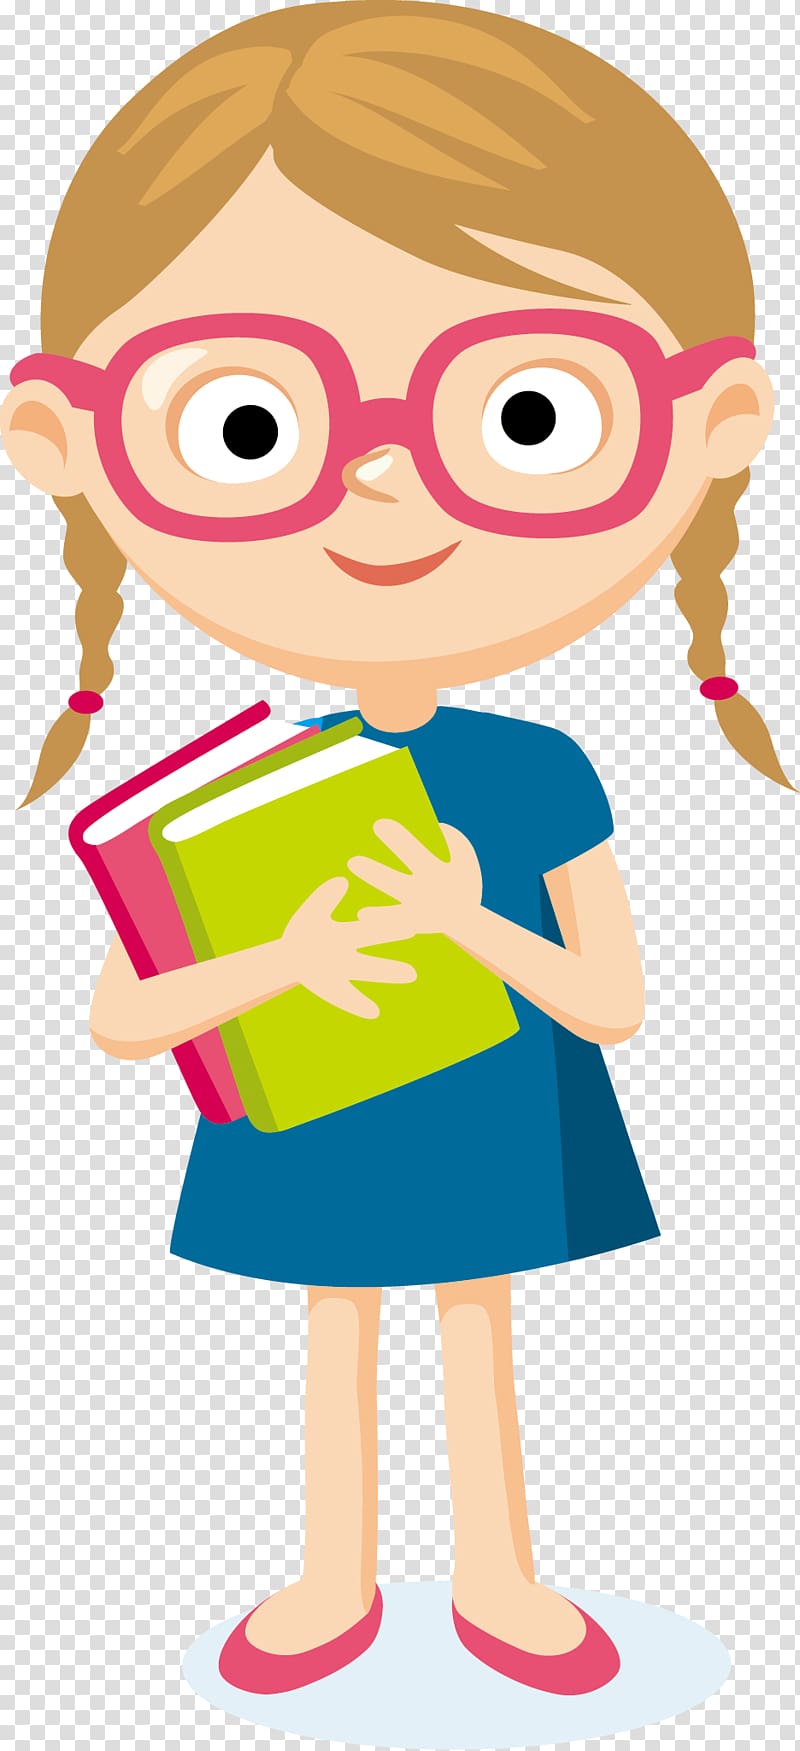 Student Cartoon, student, girl carrying two books